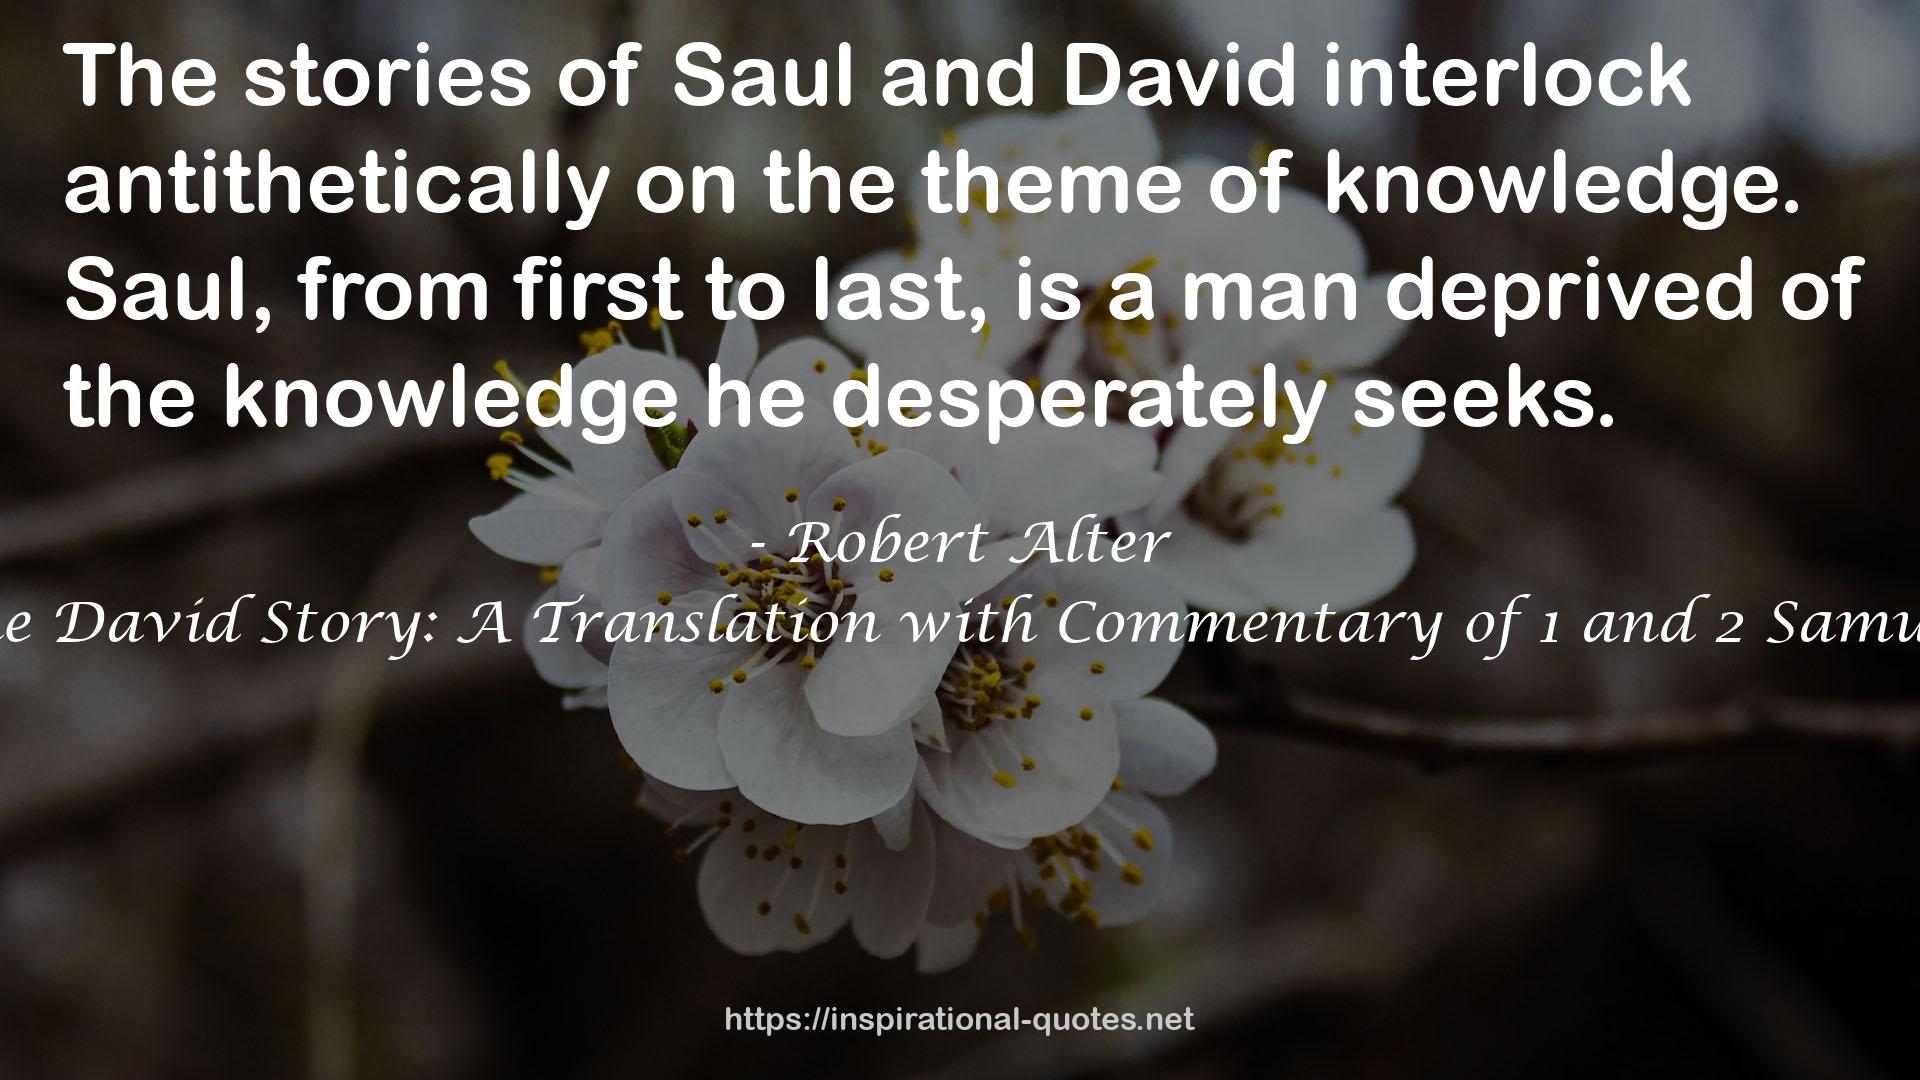 The David Story: A Translation with Commentary of 1 and 2 Samuel QUOTES